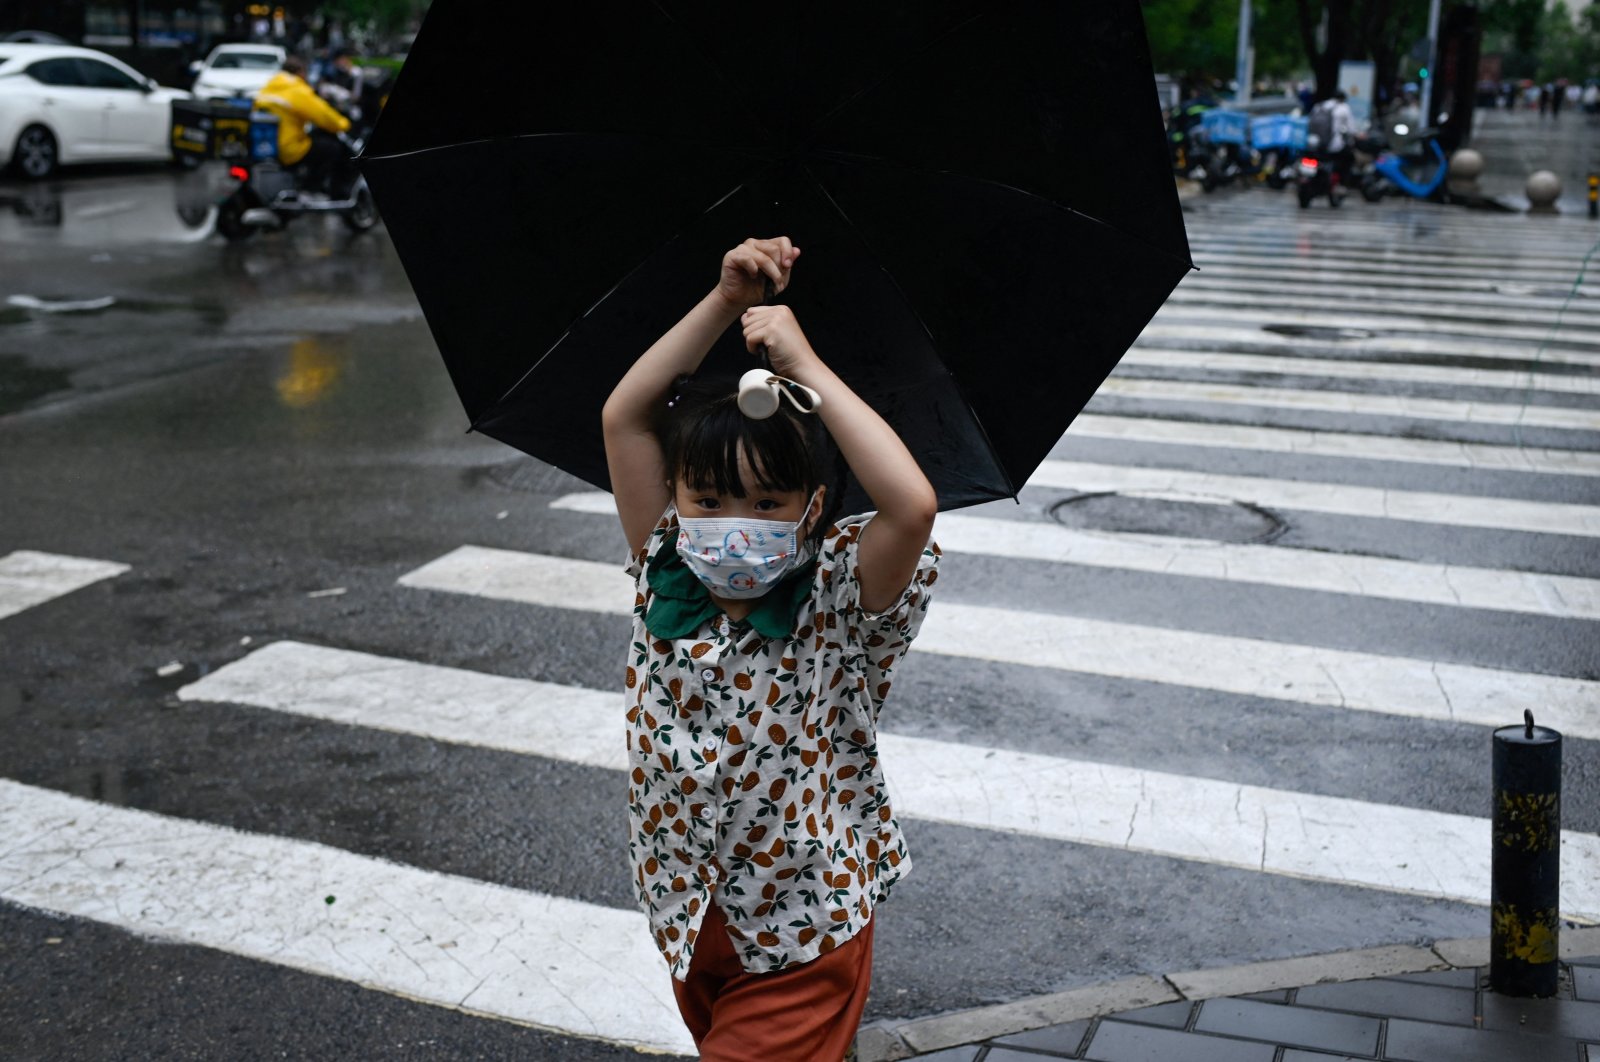 A child holding an umbrella crosses a street in Beijing, China, July 12, 2022. (AFP Photo)